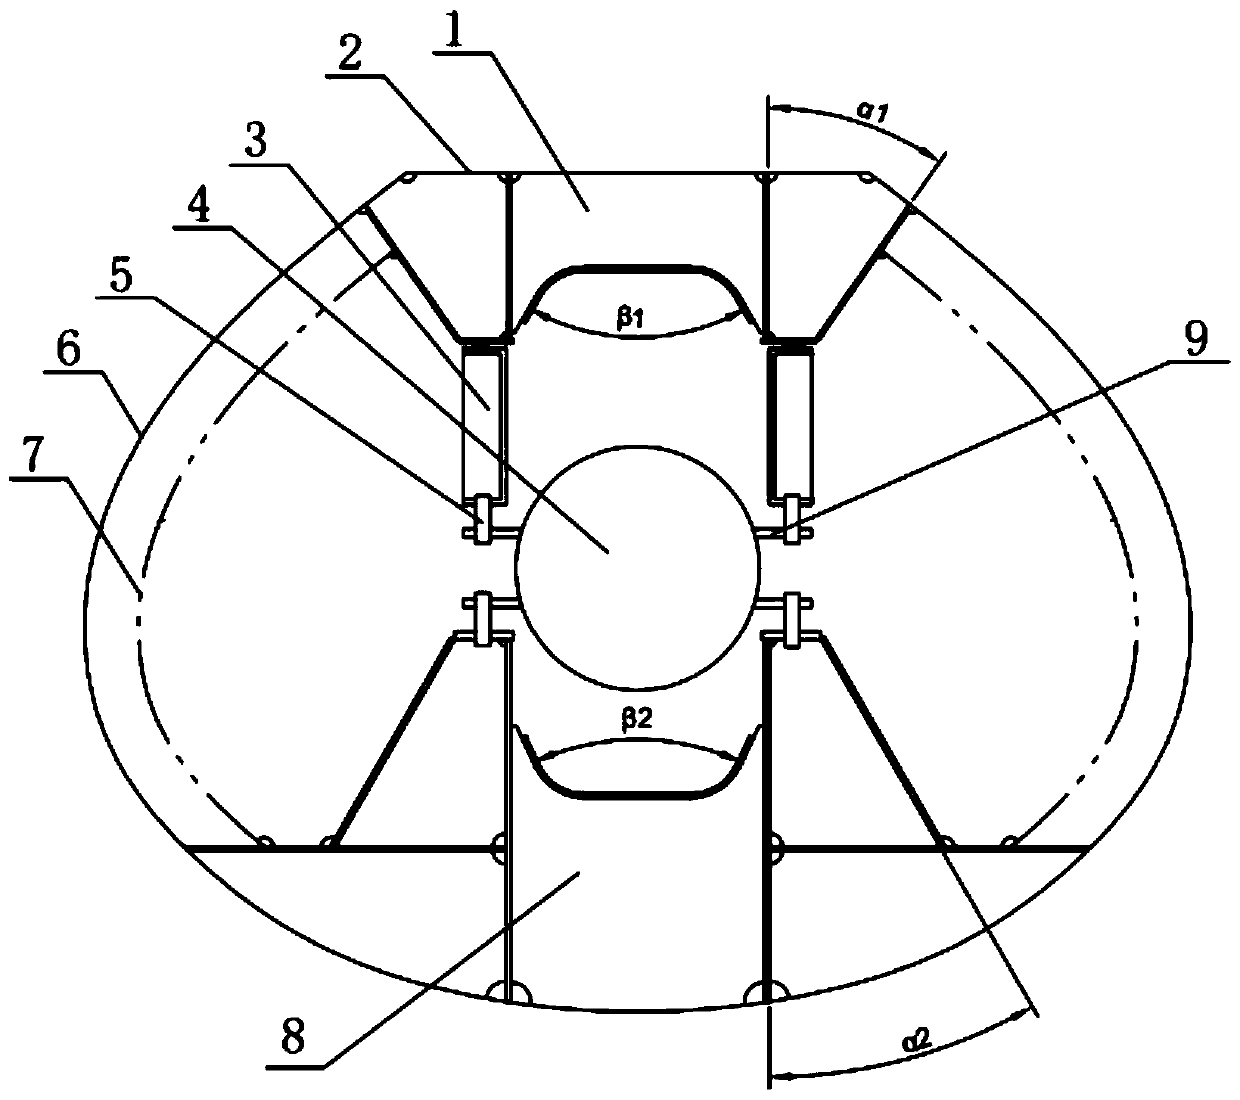 Up-and-down symmetrical thrust bearing base for small waterplane catamaran